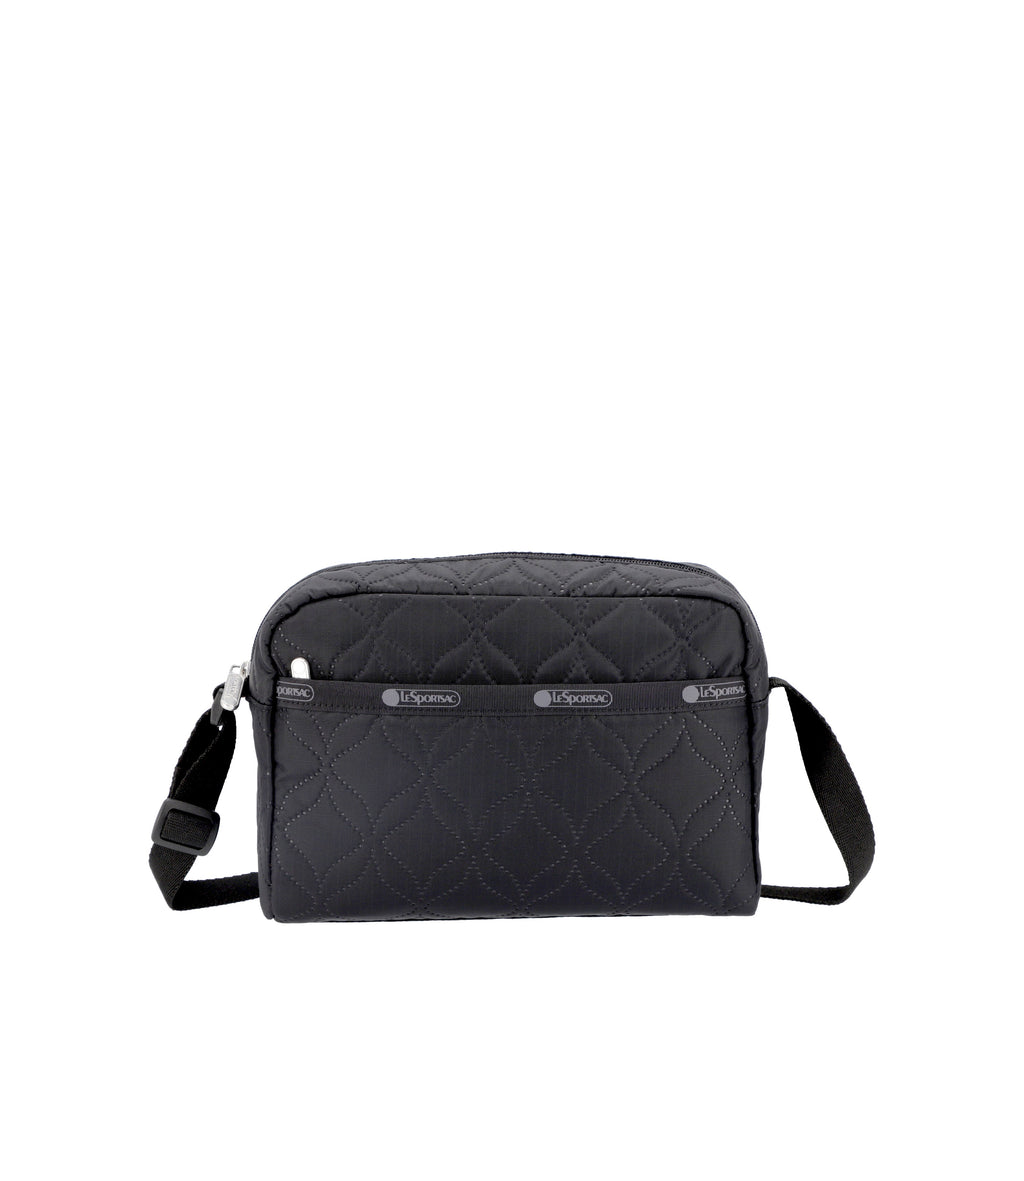 Woven Chain Strap Quilted Crossbody Bag - AnnaKastle